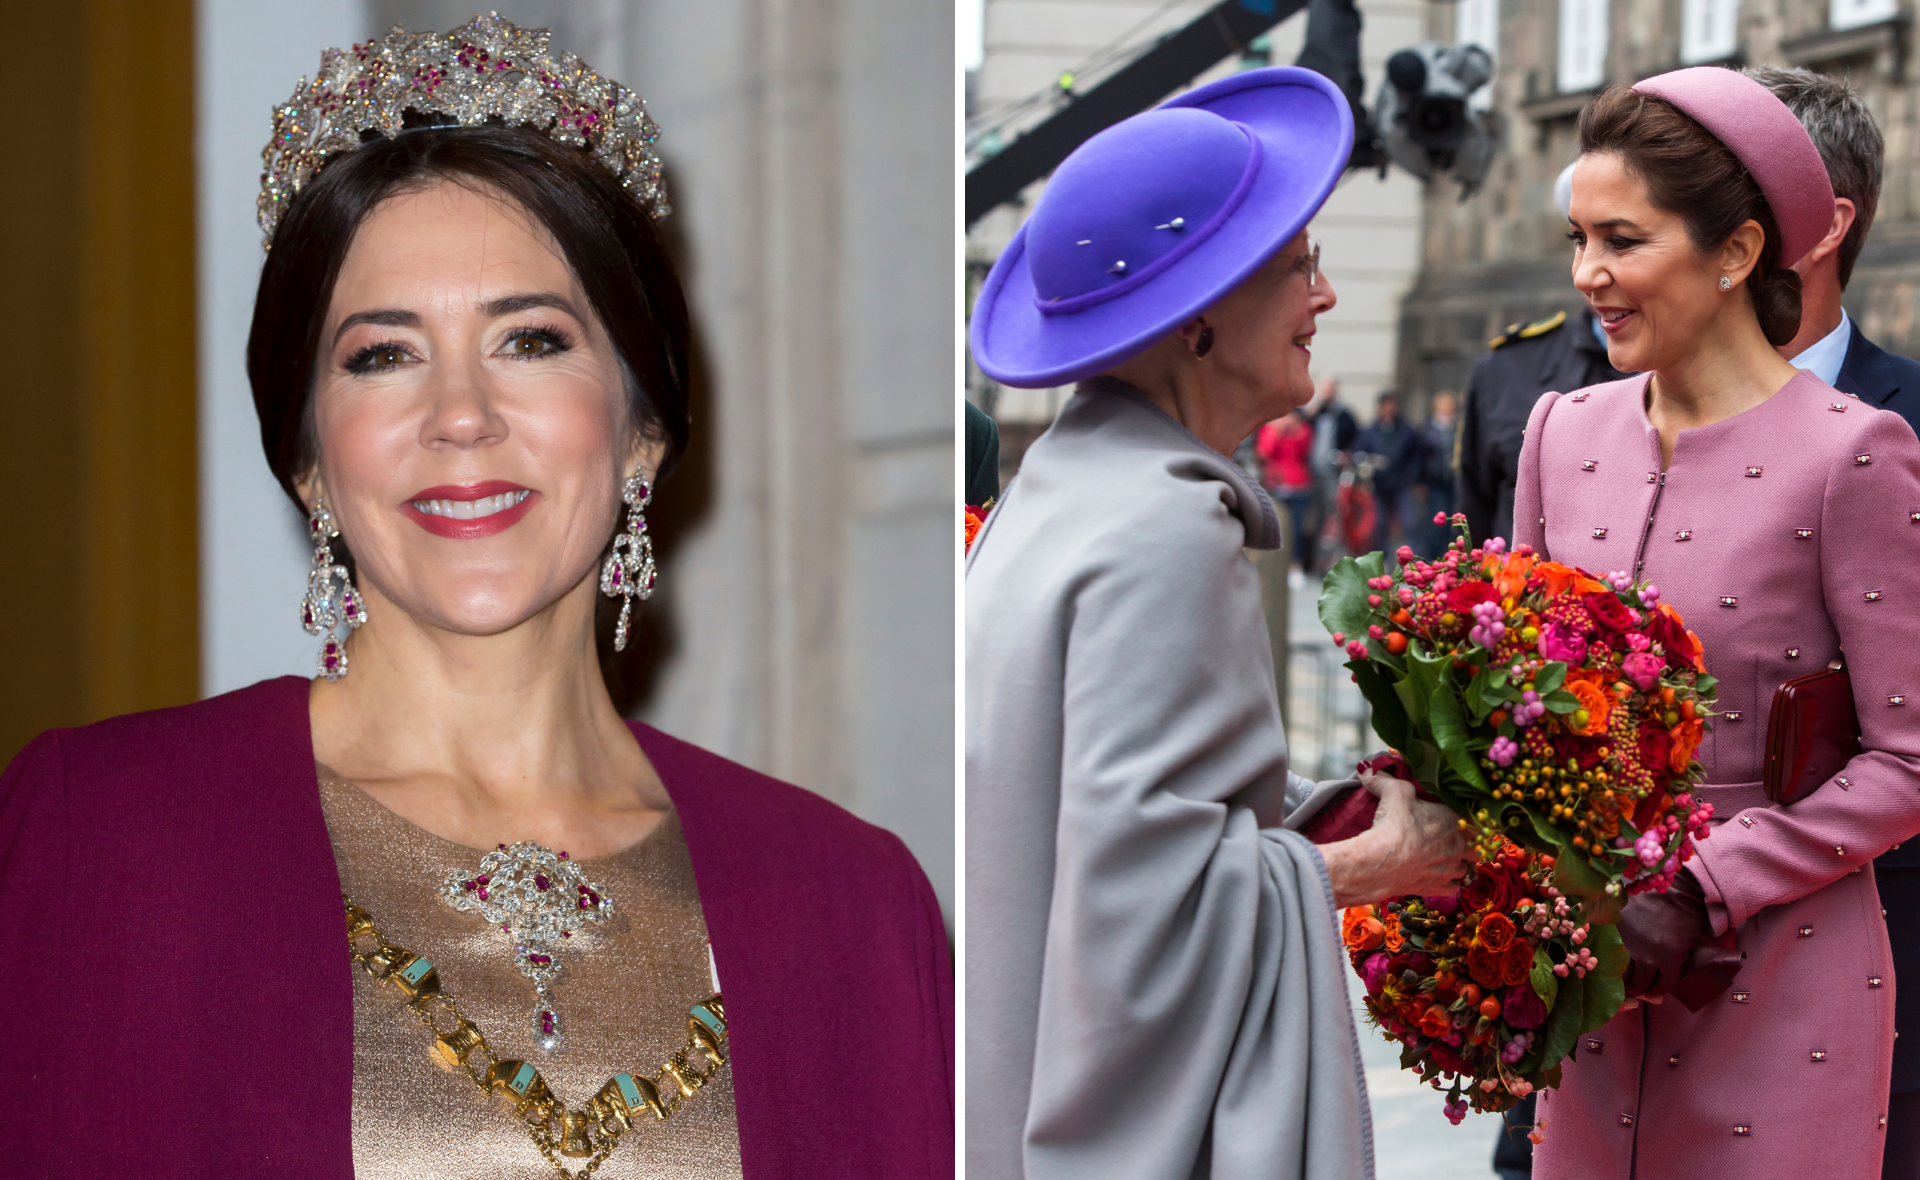 EXCLUSIVE: Is Princess Mary about to take the Danish throne and become Queen?